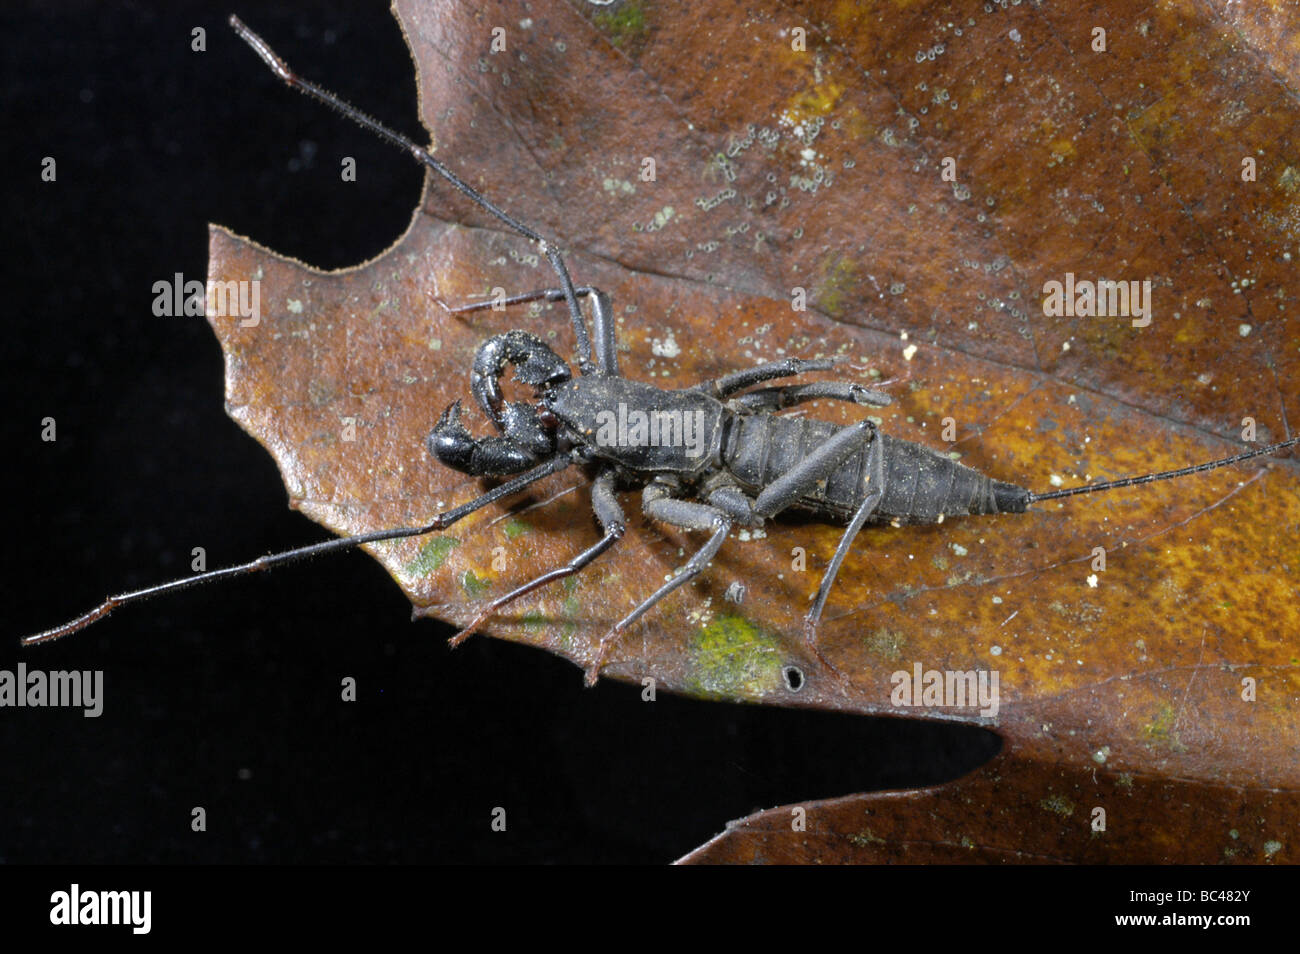 Whip Scorpion on a leaf Stock Photo